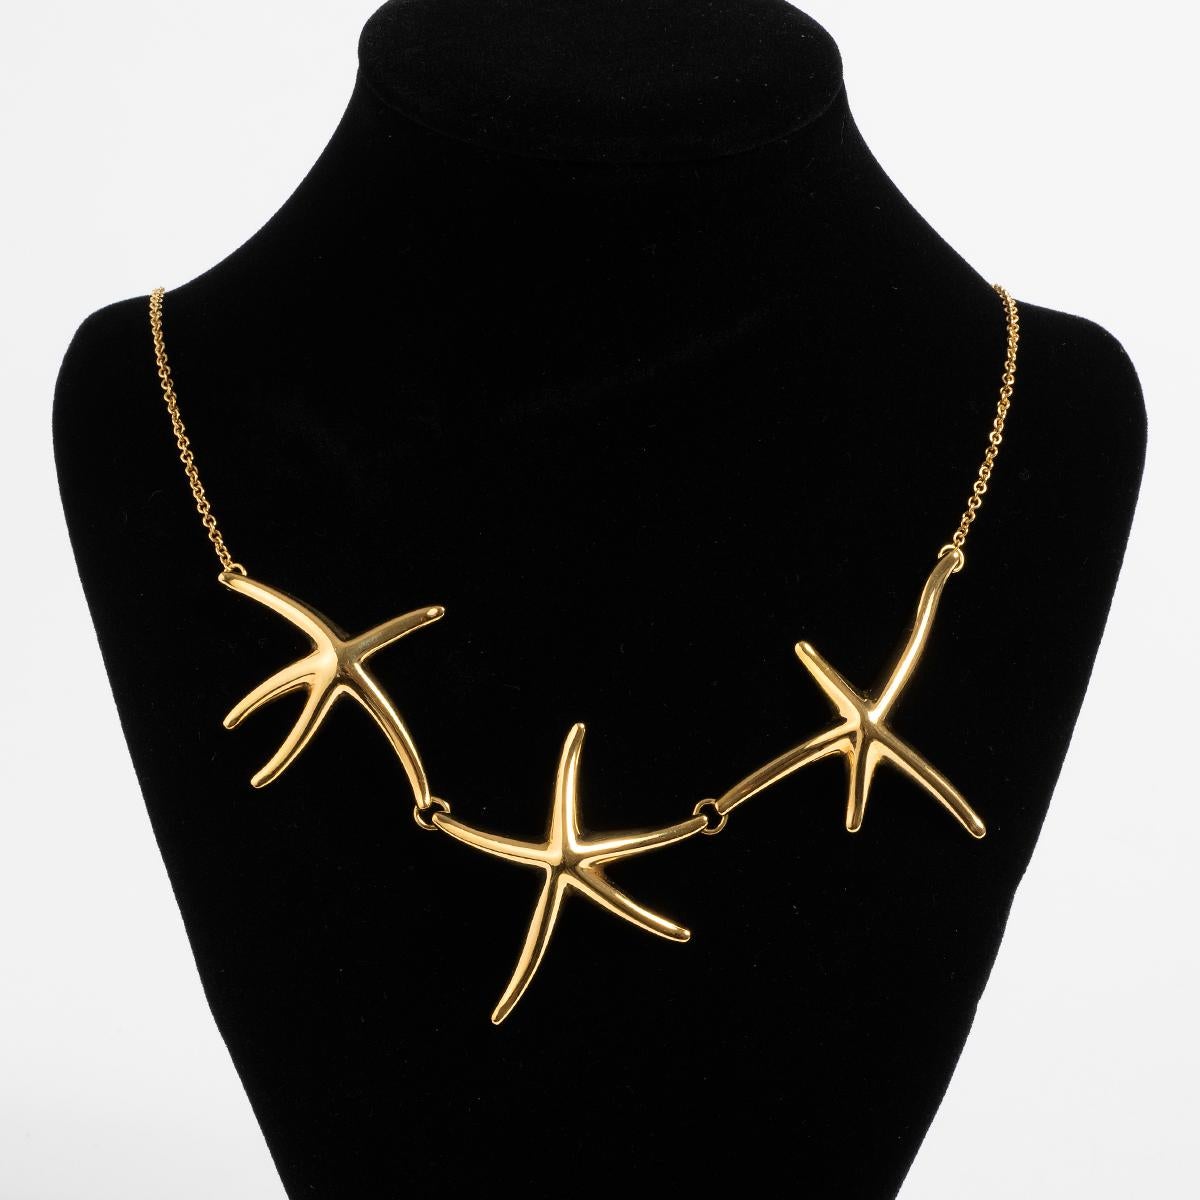 Our vintage and rare Tiffany & Co starfish necklace was designed by Elsa Peretti and part of the Elsa Peretti range. Comprising three linked Starfish, and necklace all of 18k yellow gold, this beautiful piece comes with its original Tiffany & Co